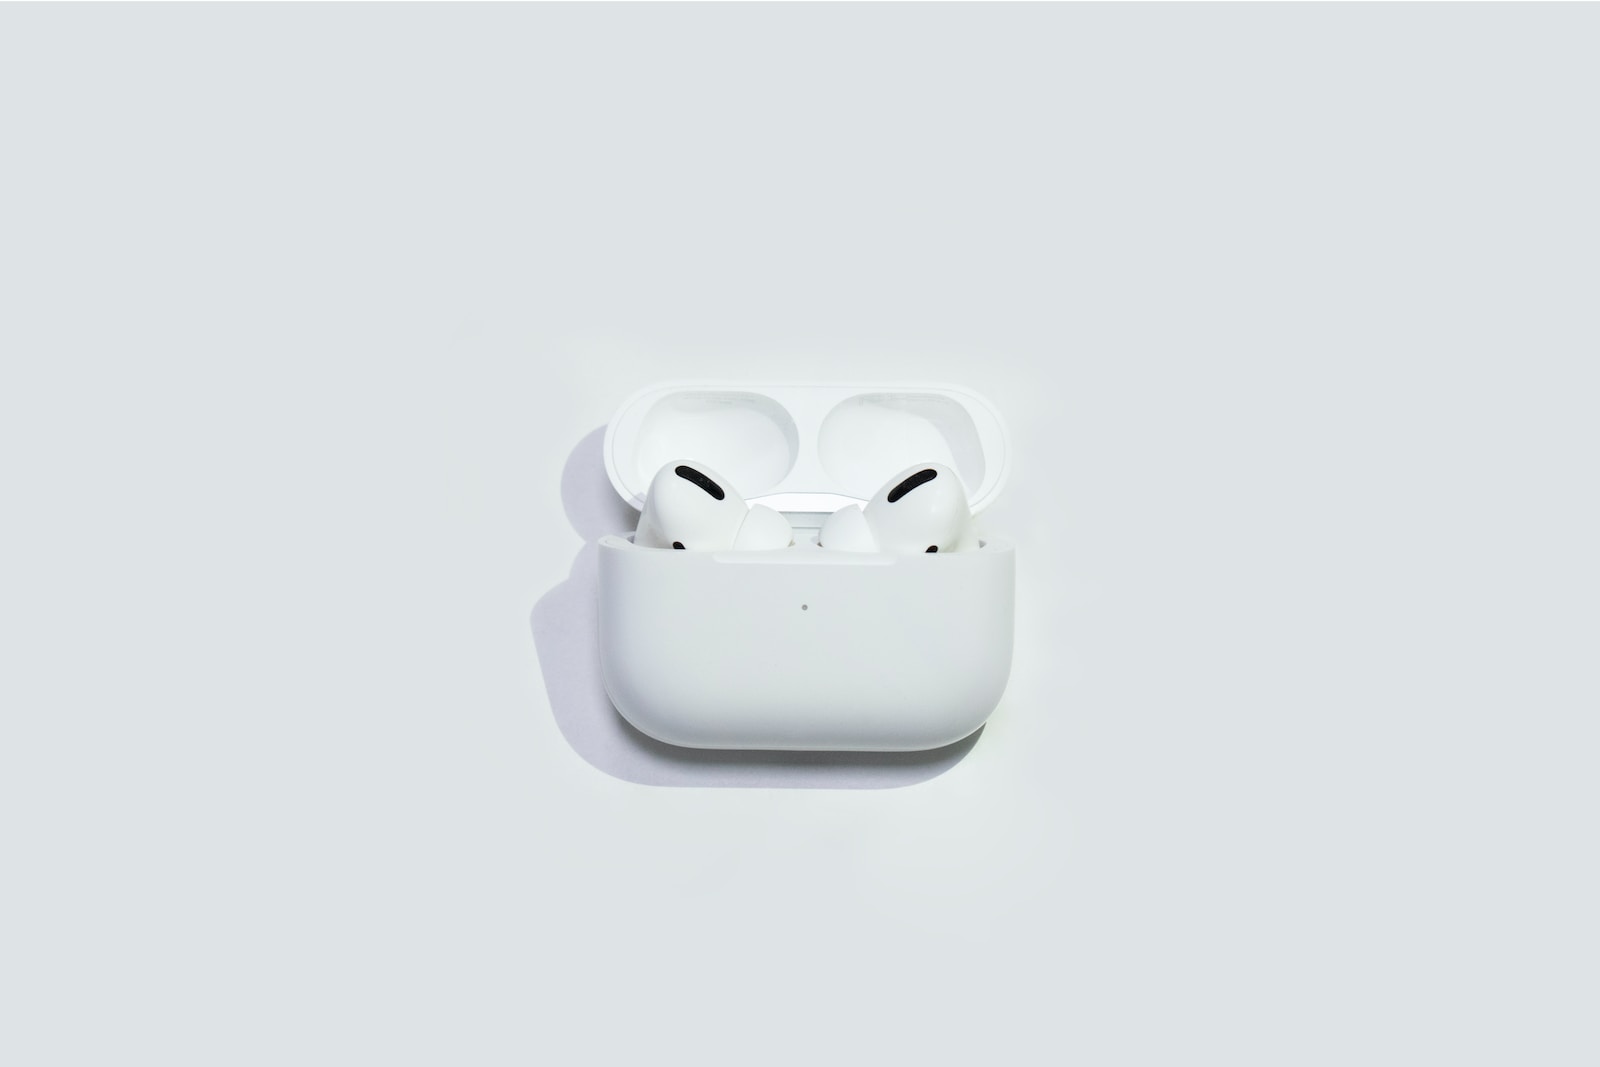 Why are airpods not announcing text messages?